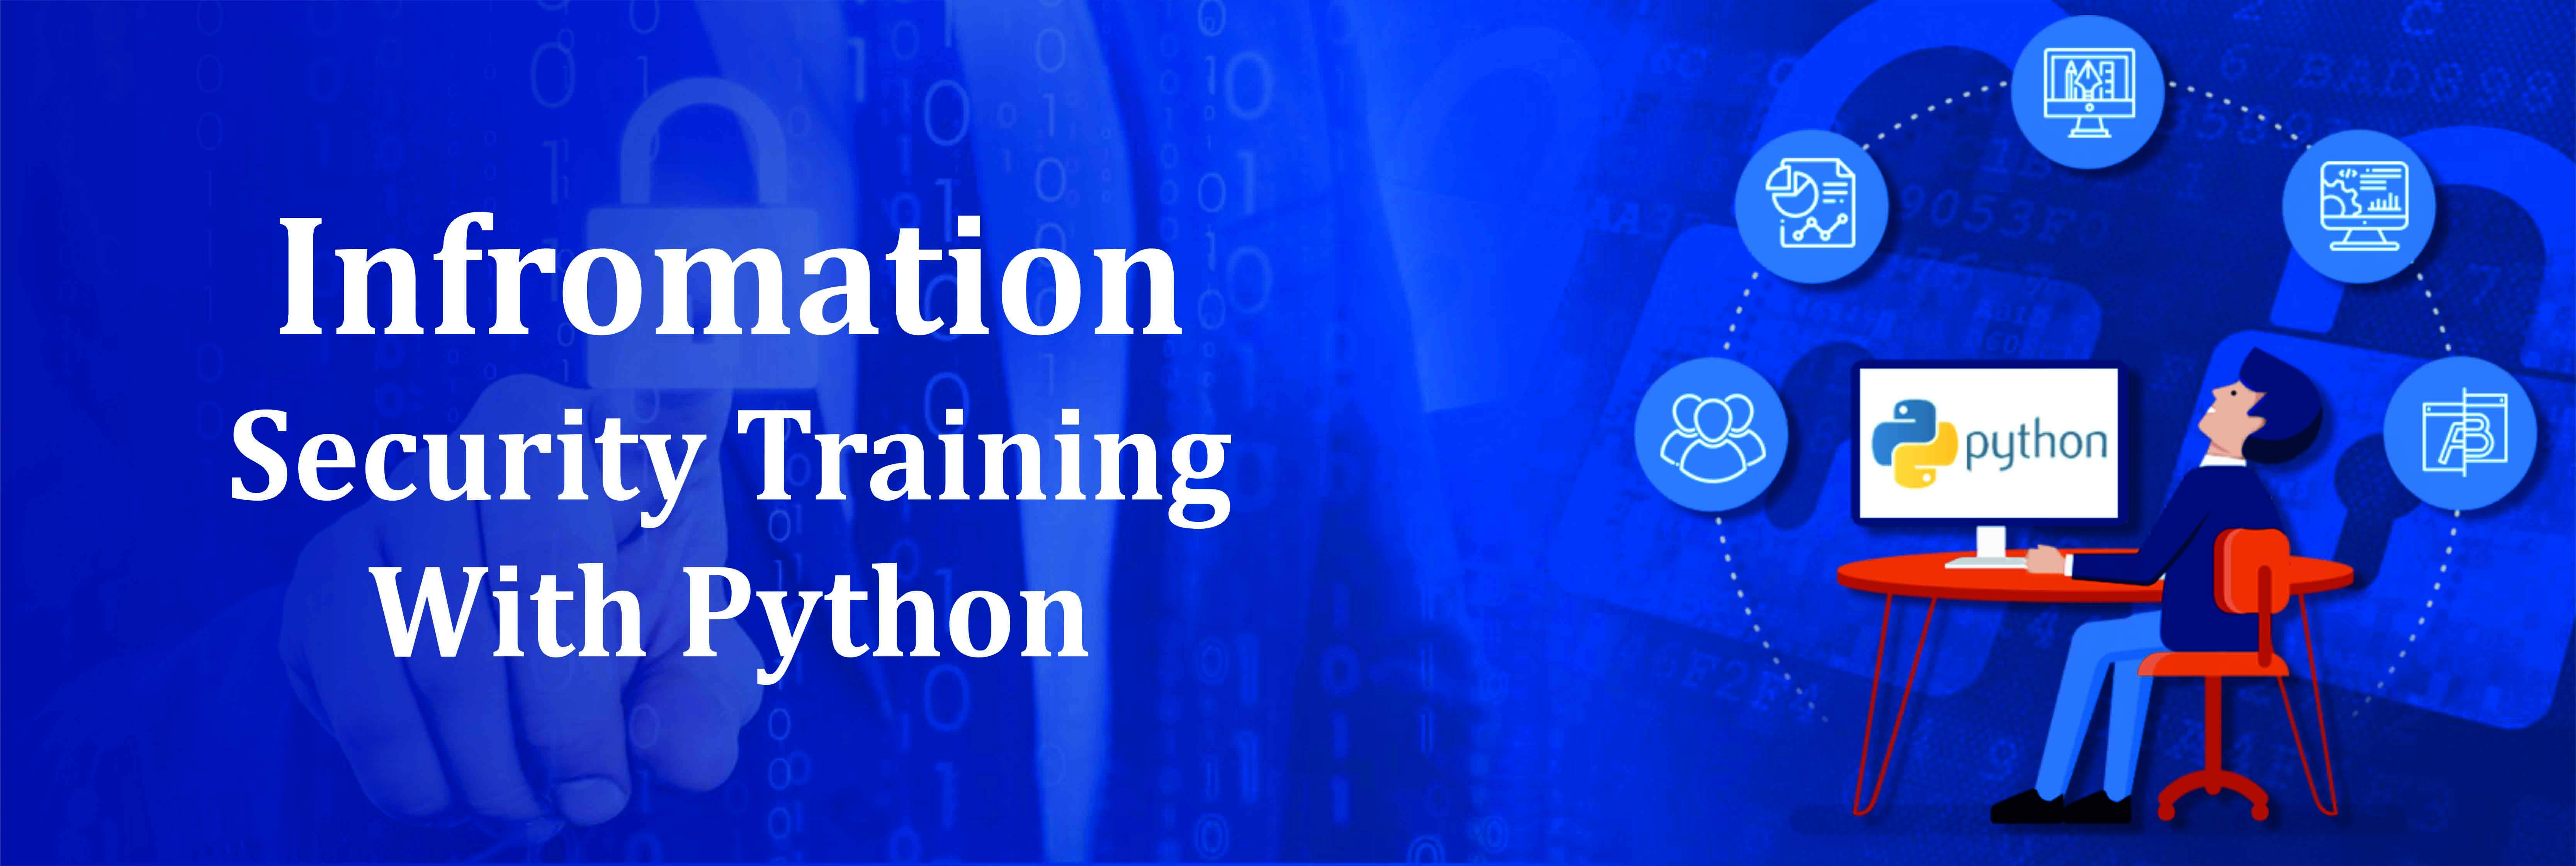 Information Security Training with Python